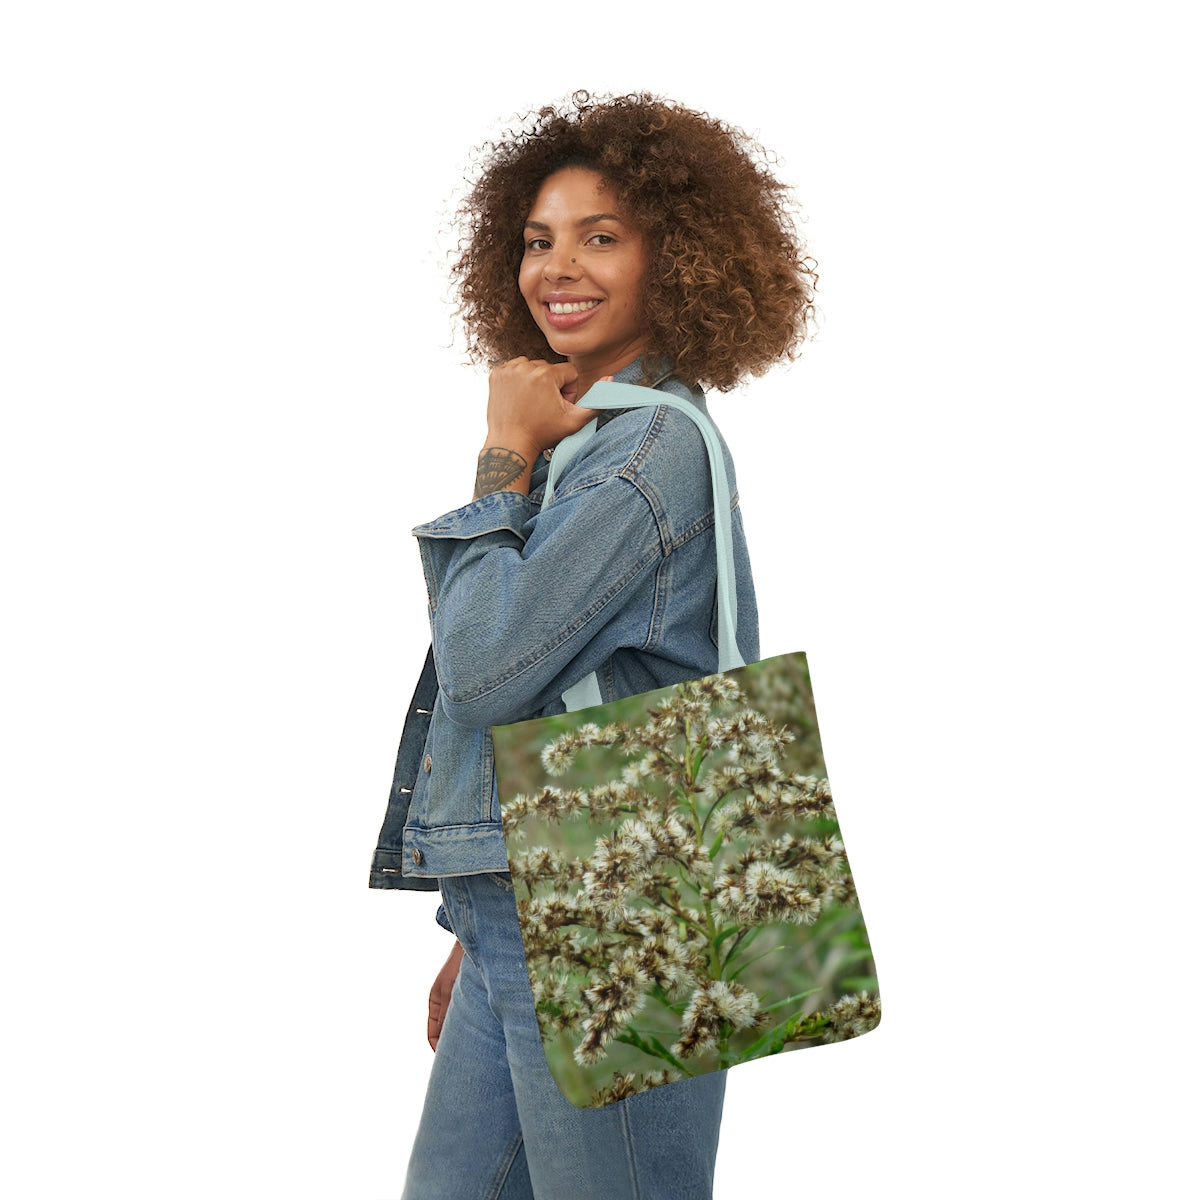 "Growing Plant" Tote bag by Bailey